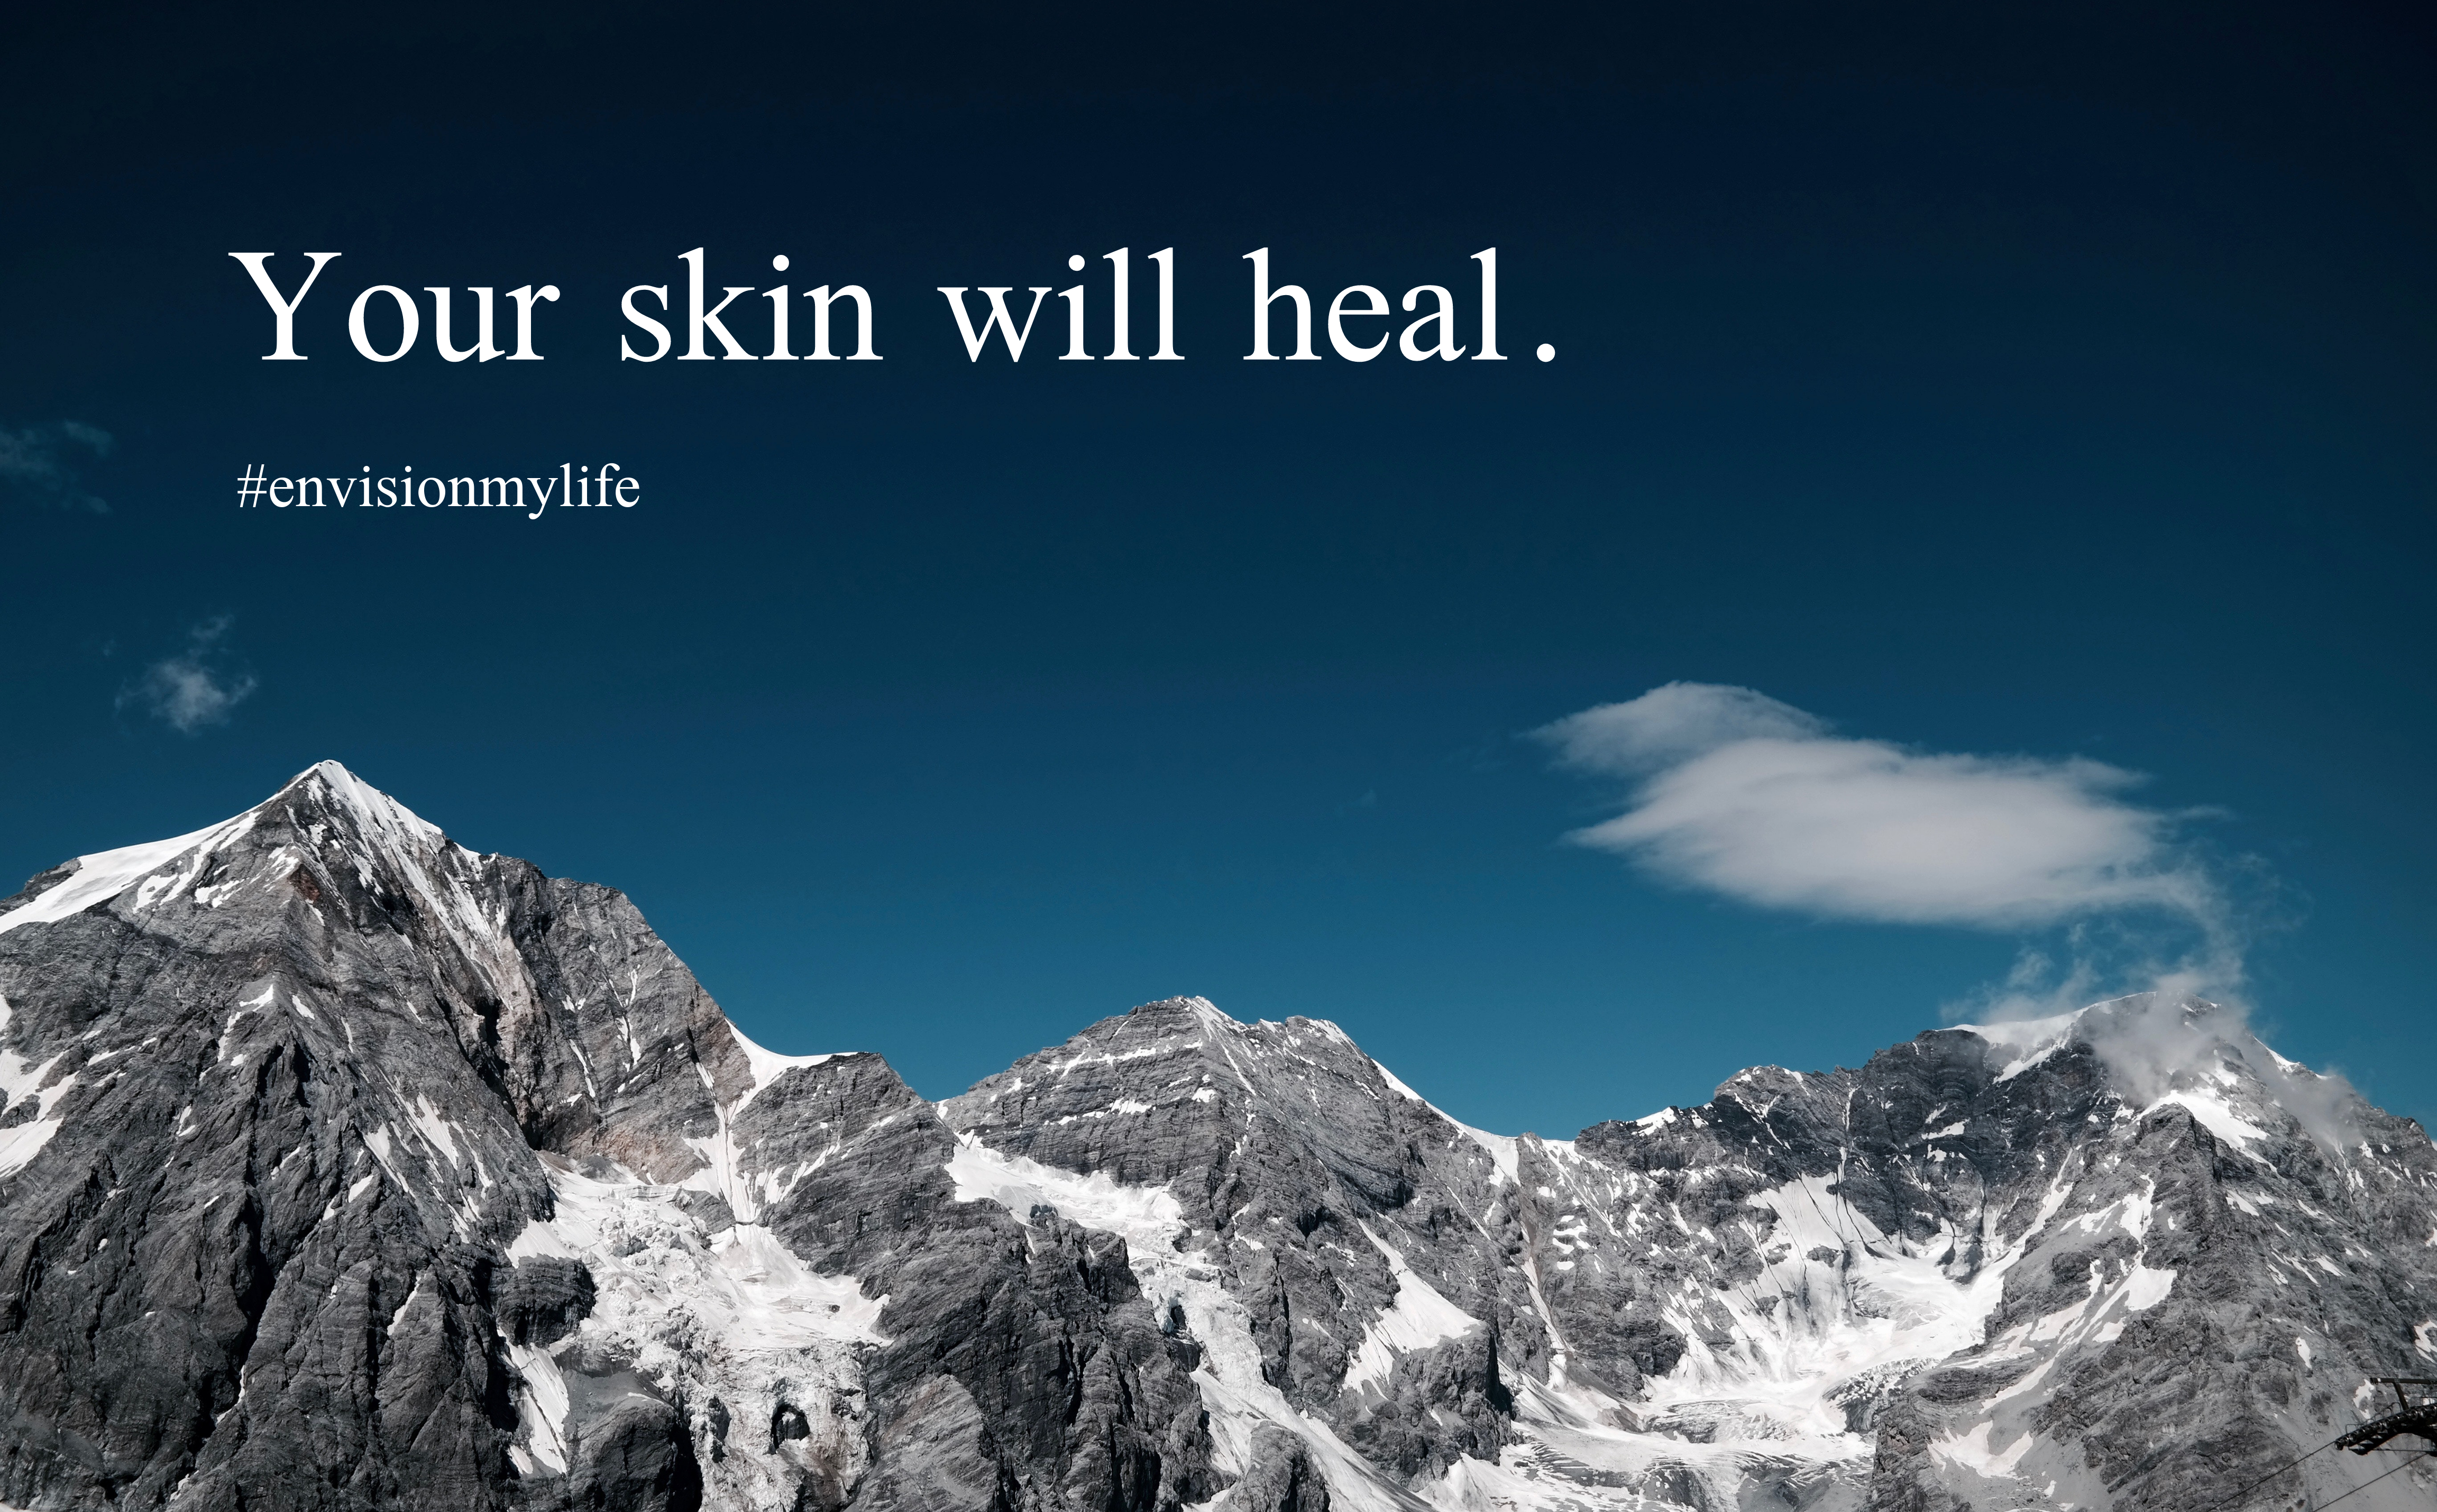 Your skin will heal.